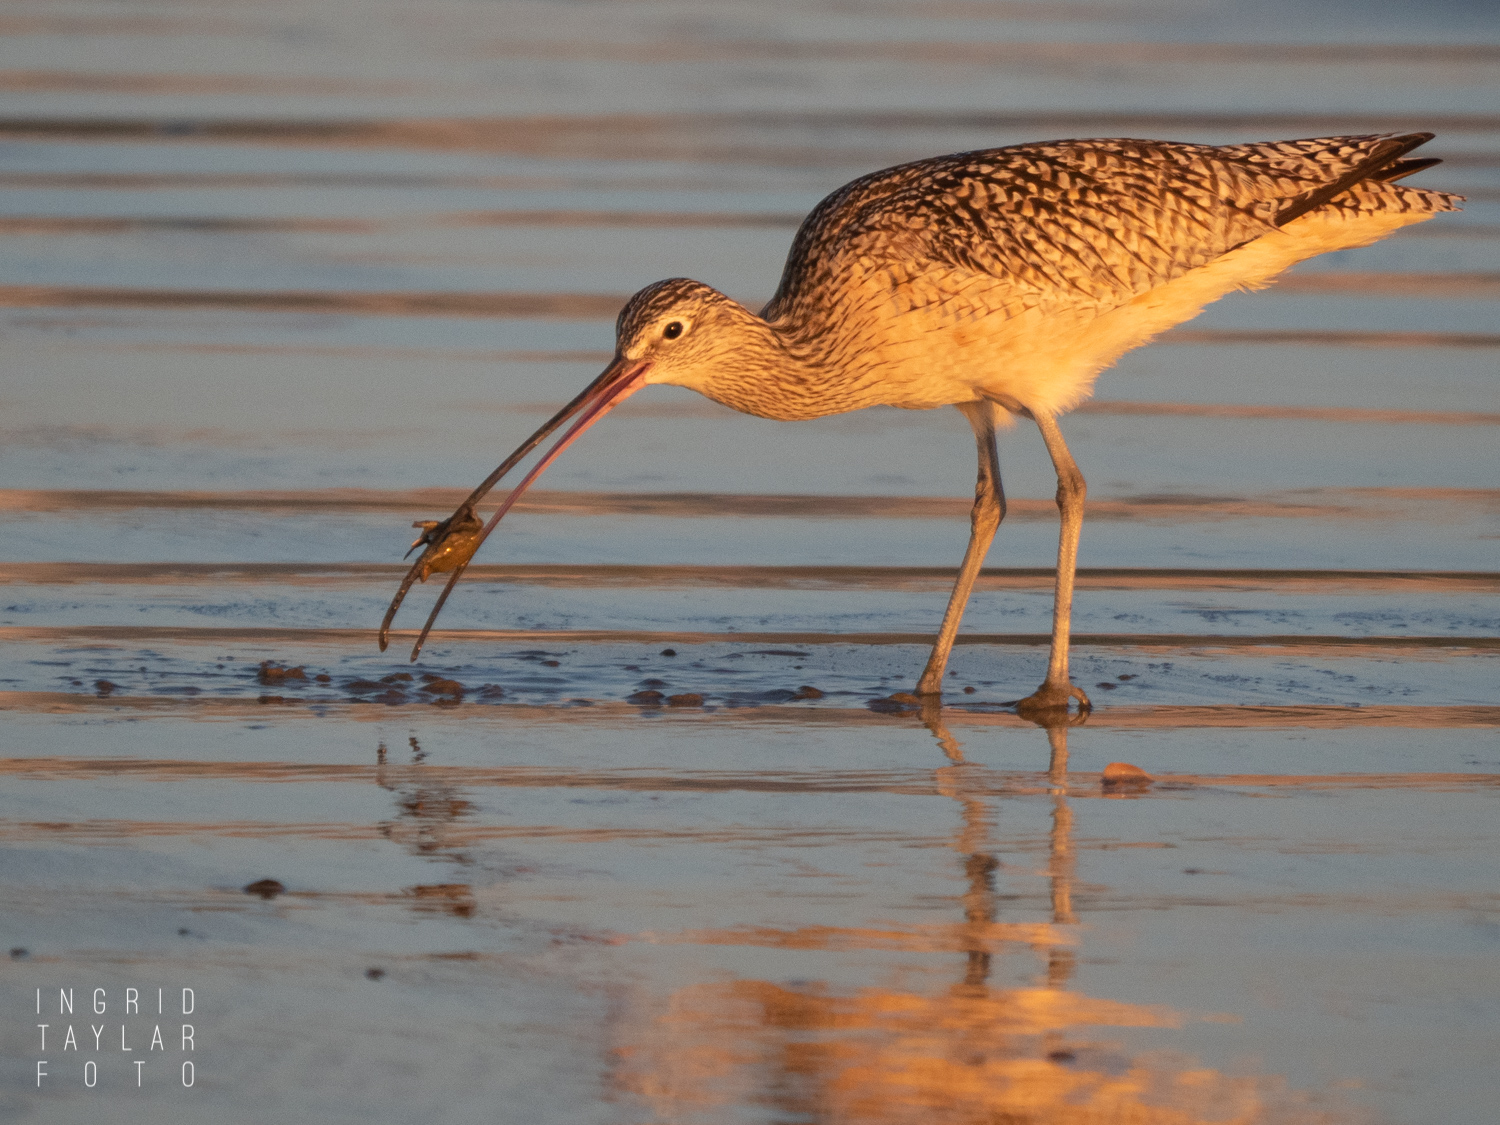 Long-Billed Curlew with Mole Crab on Morro Strand